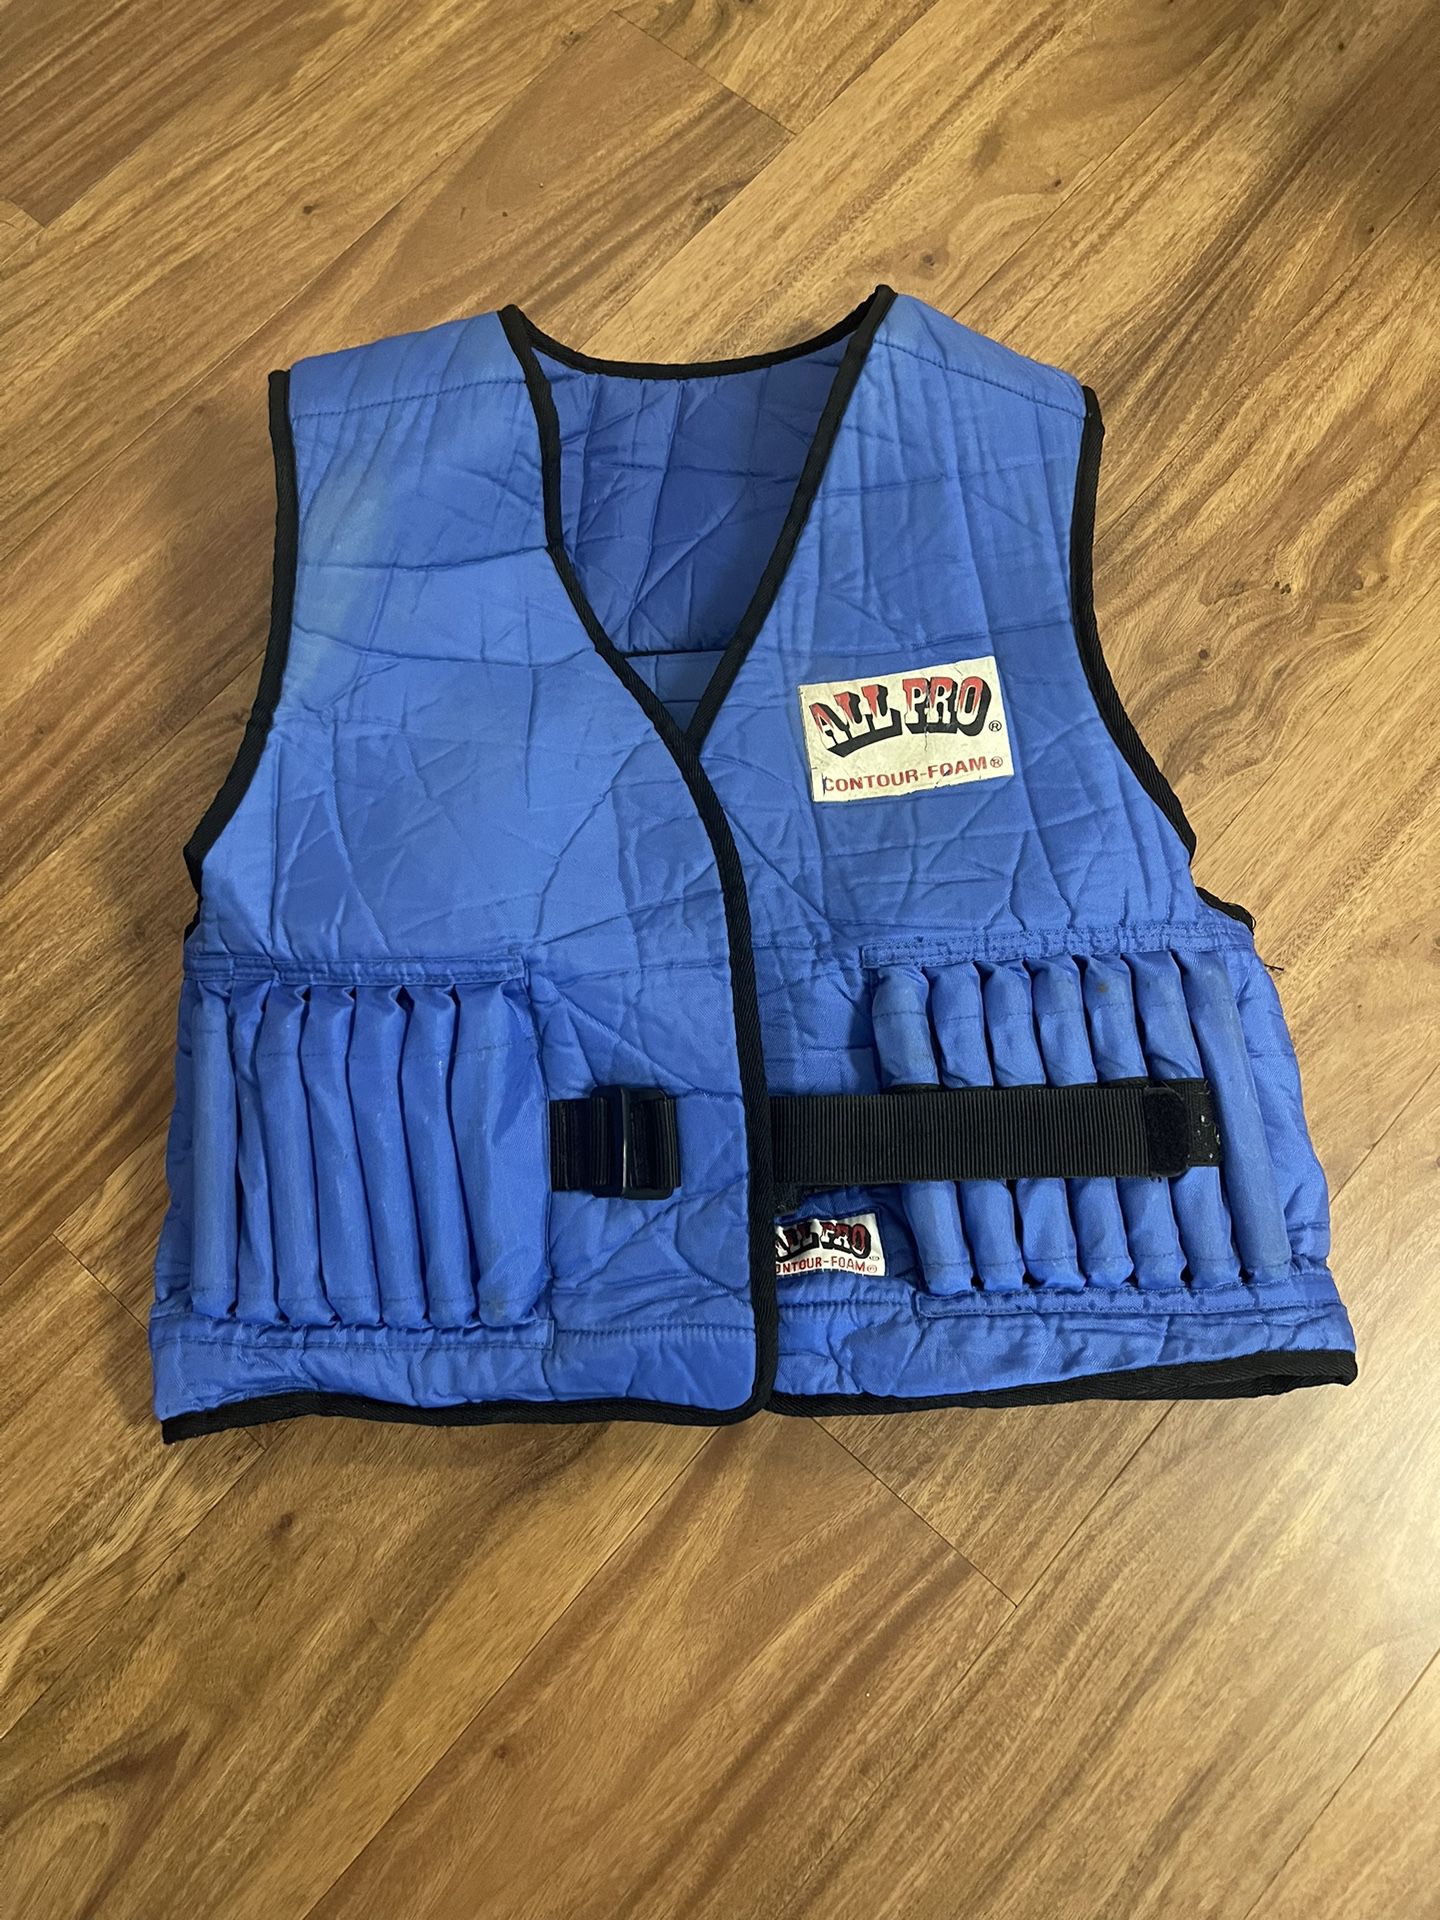 Exercise weight vest